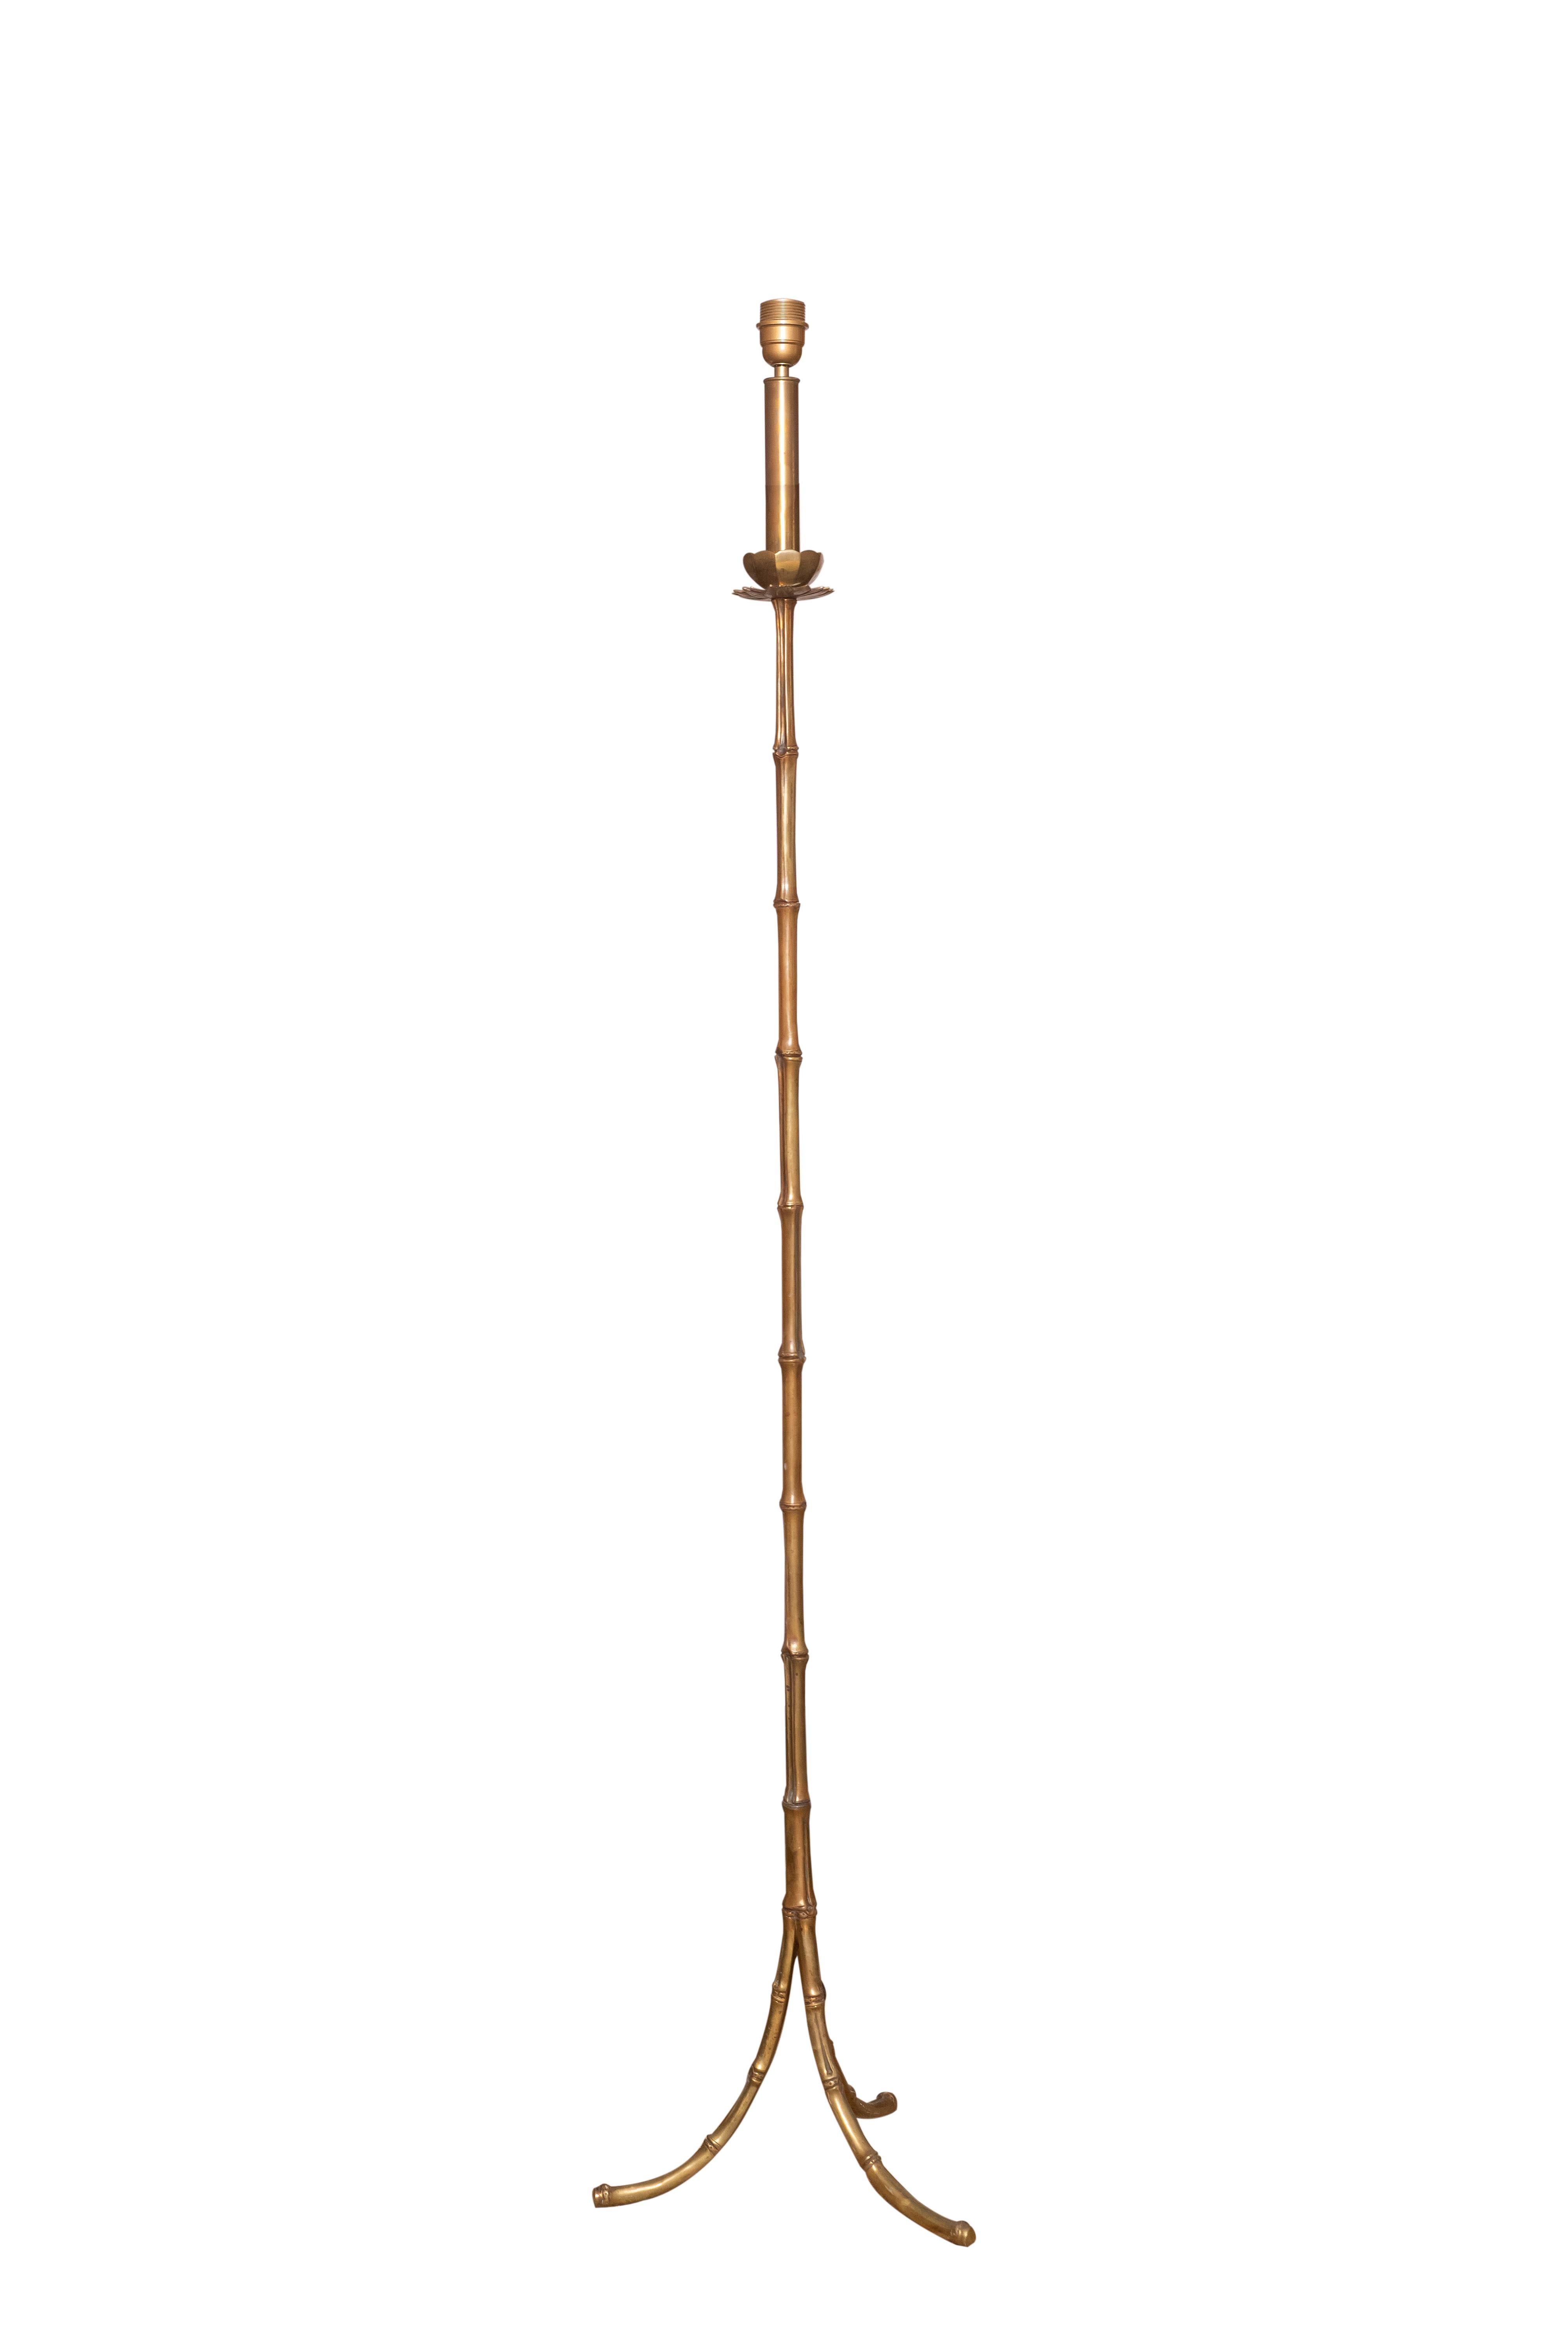 A 20th century Maison Baguès bronze faux bamboo floor lamp.
Maid on solid bronze faux bamboo rests on a tripod leg. With a 